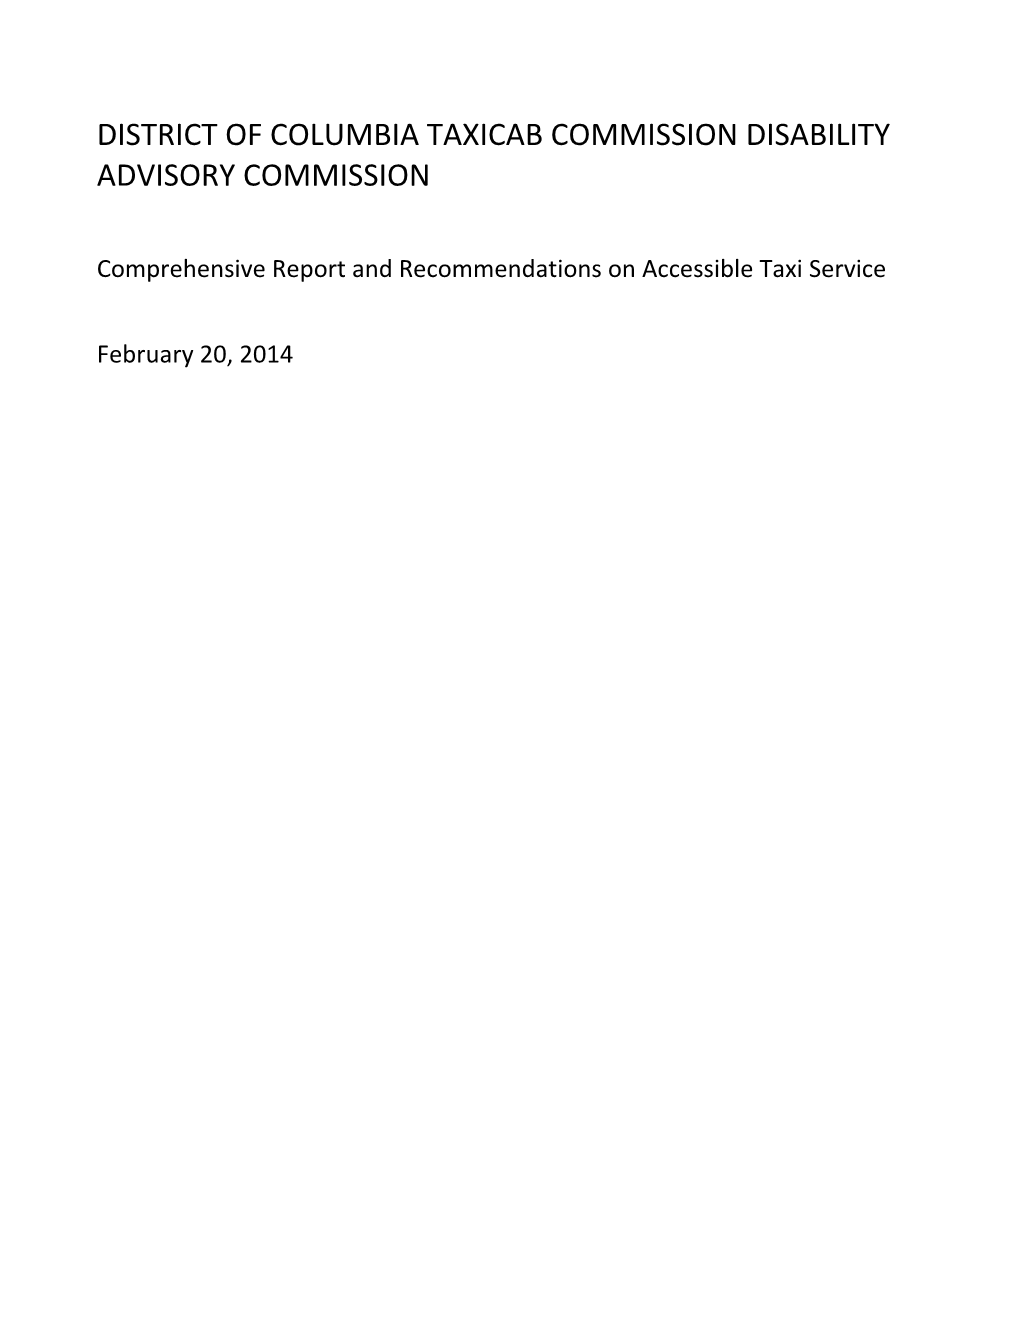 District of Columbia Taxicab Commission Disability Advisory Committee